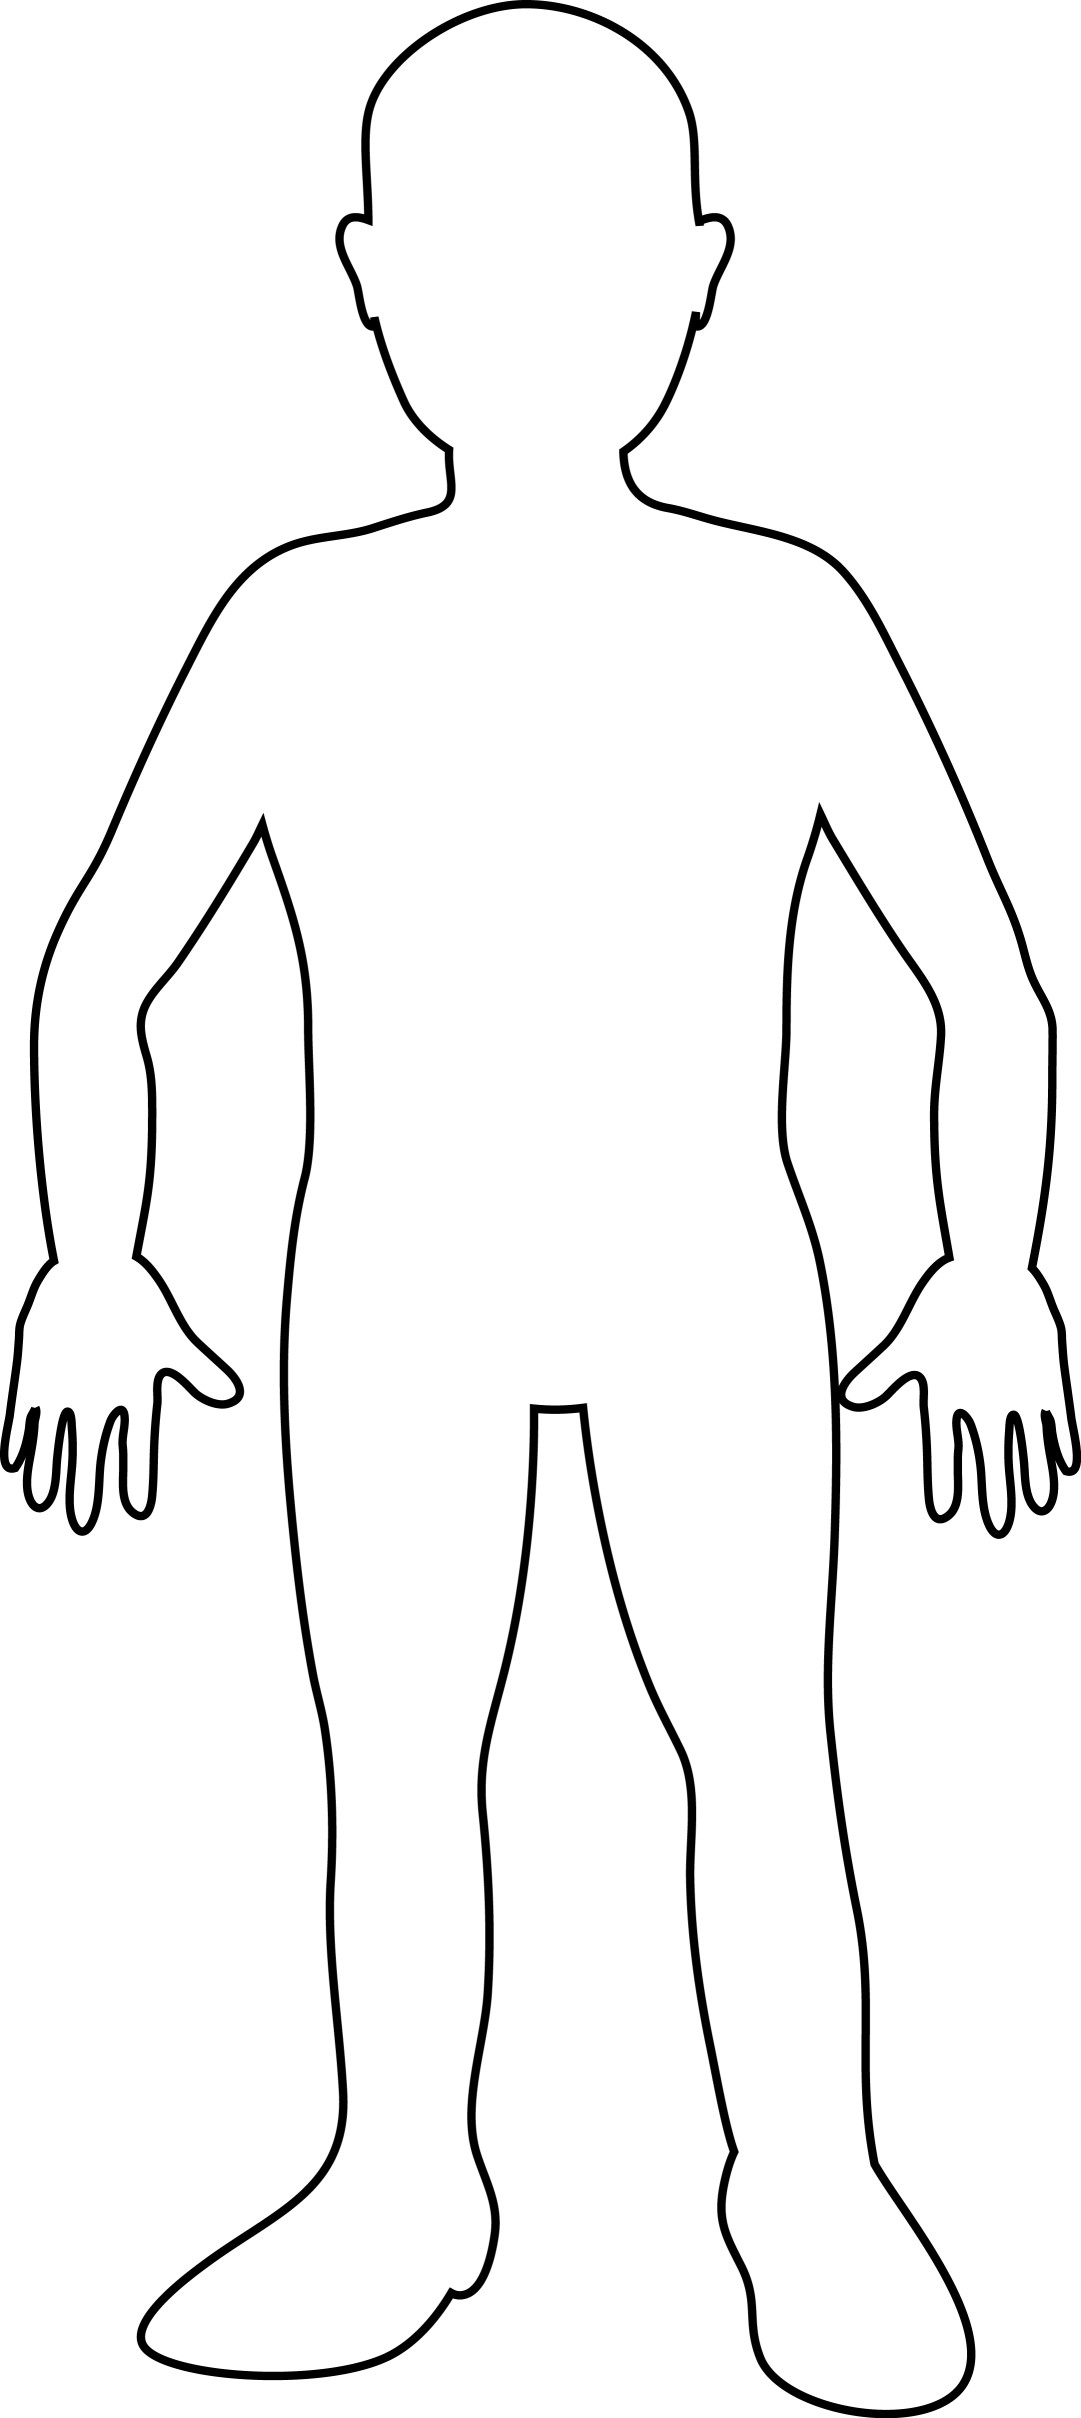 Human body black and white clipart